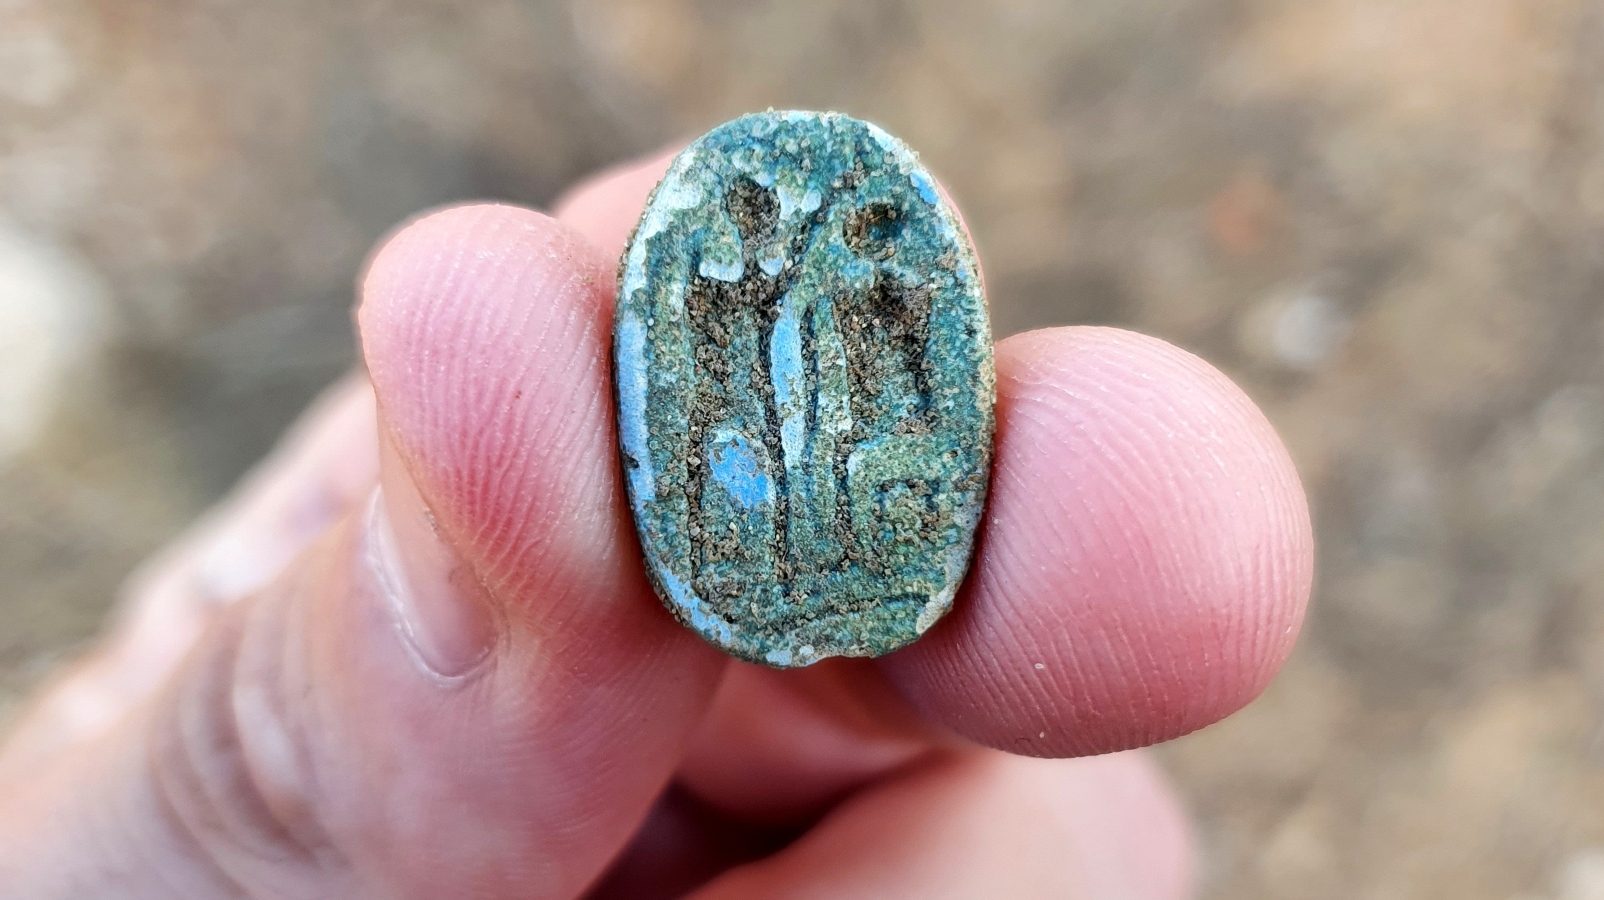 The scarab, showing a seated figure on the right and a standing figure with a raised arm on the left, possibly symbolizing the imparting of authority. Photo by Gilad Stern/Israel Antiquities Authority